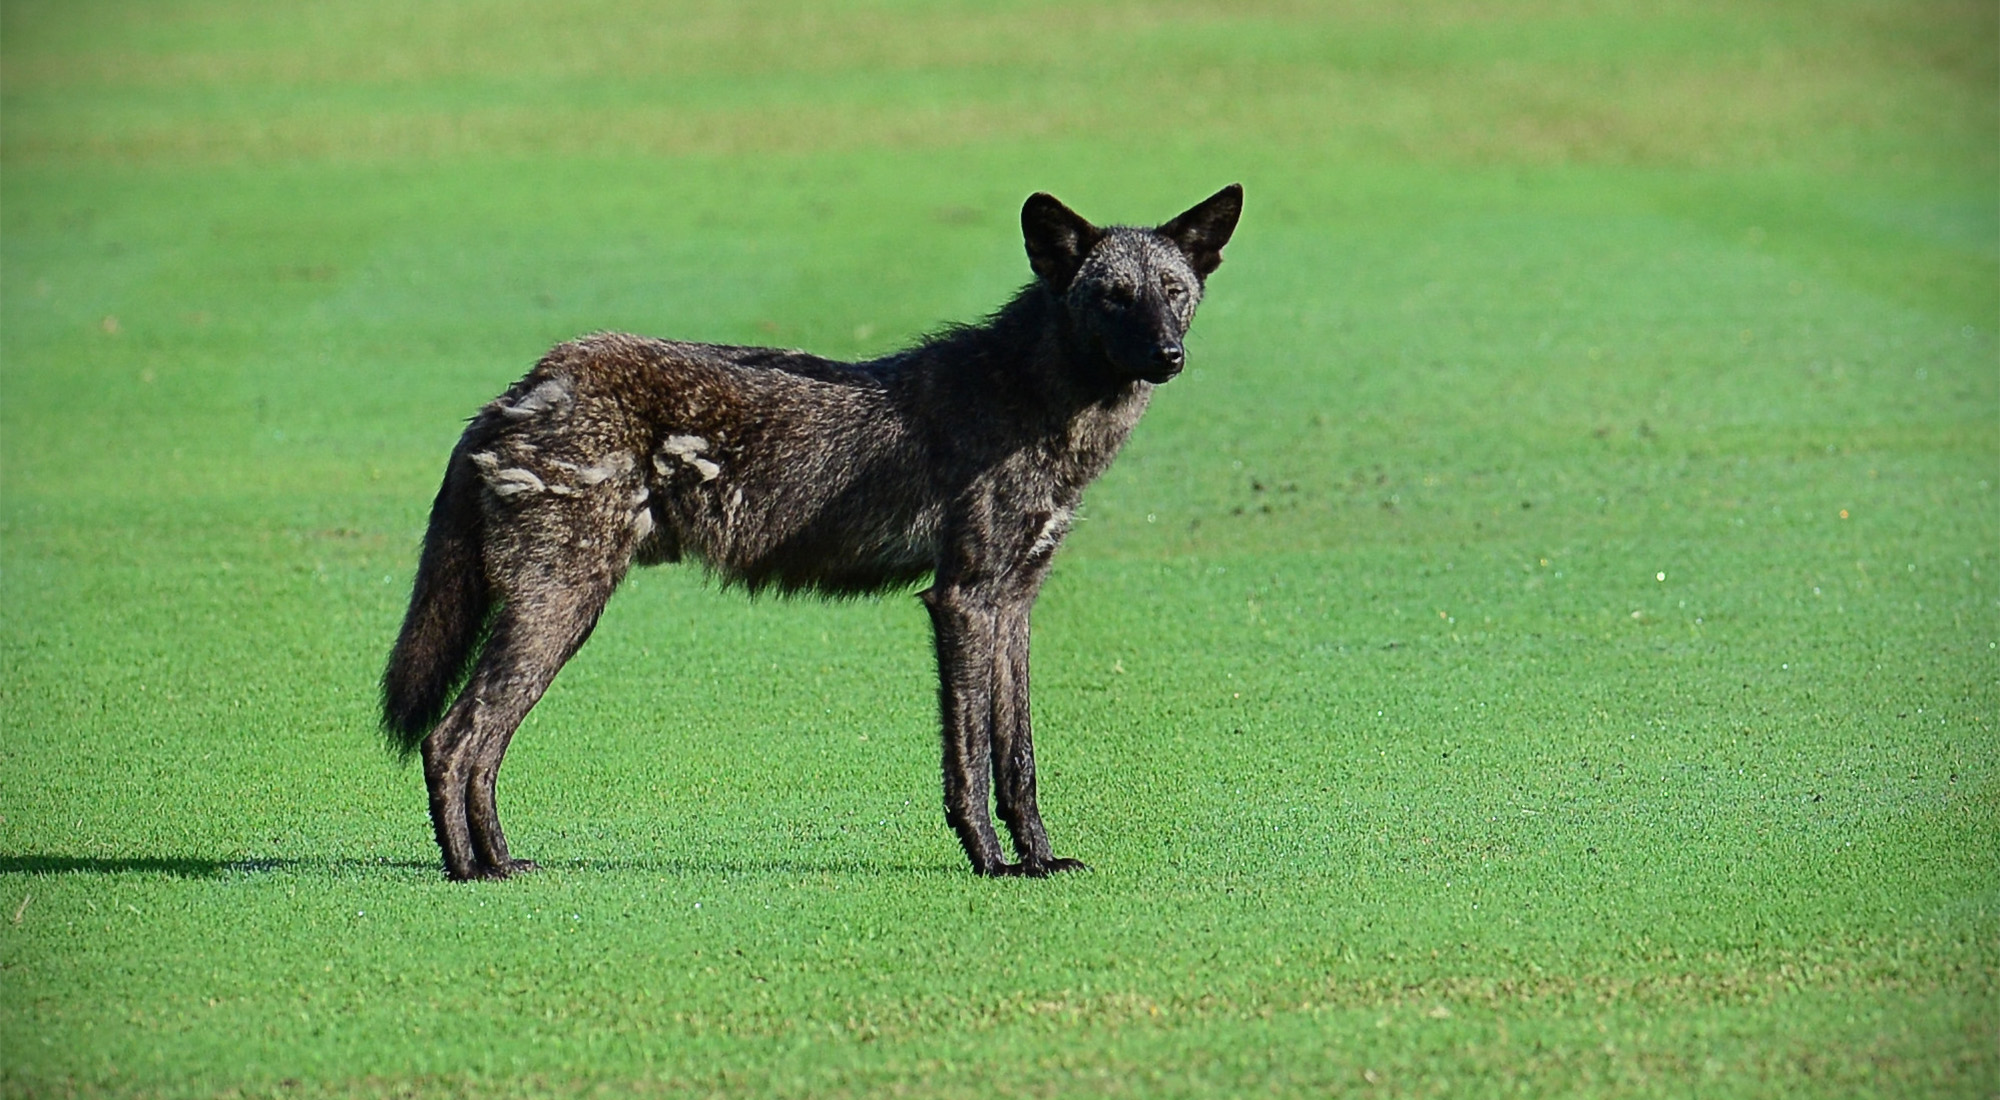 An all-black coyote on a golf course in Florida.